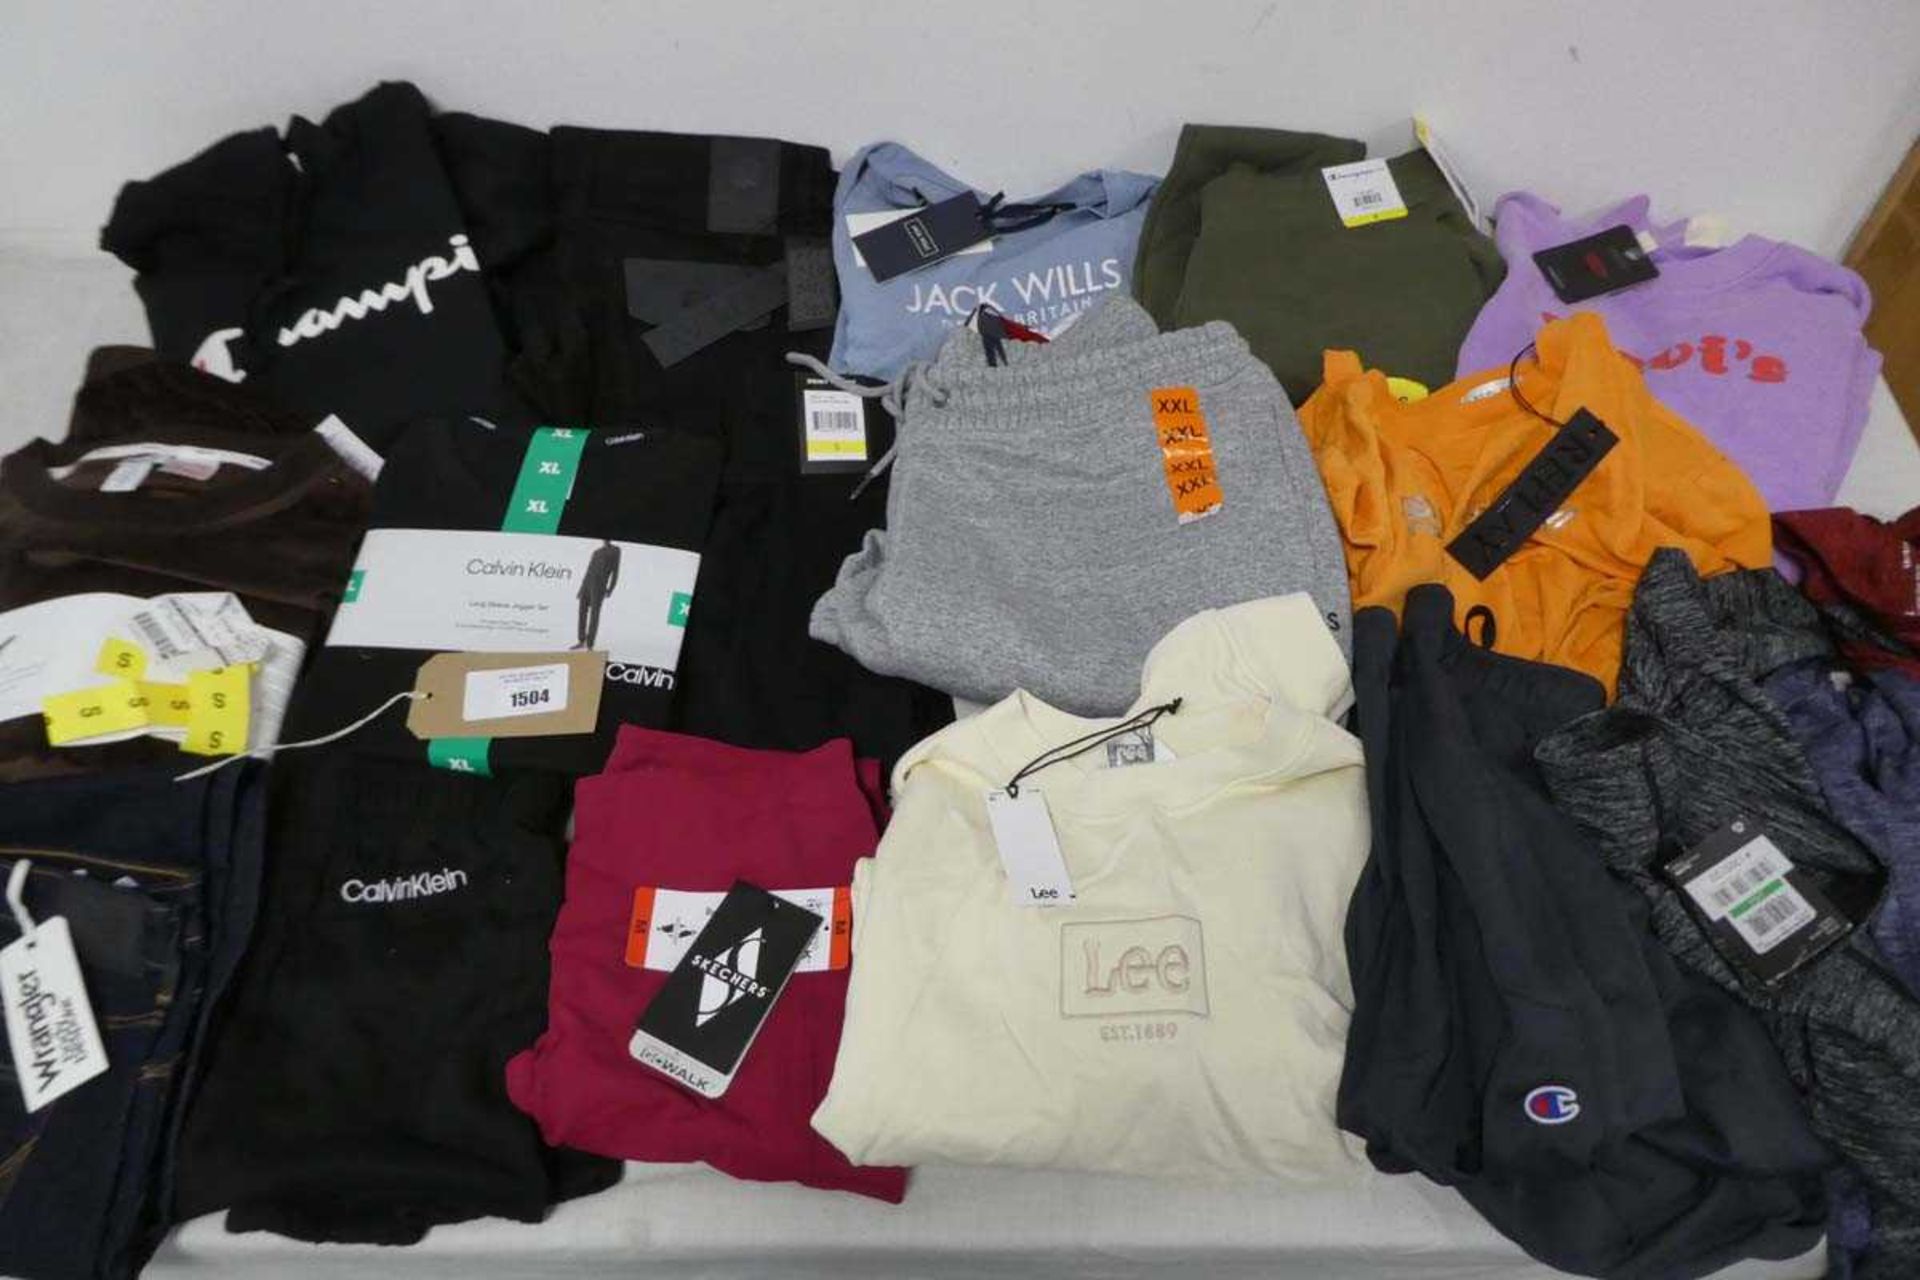 +VAT Approx. 20 items of clothing incl. Levi's, Jack Wills, Champion, Replay, Skechers, DKNY, etc.